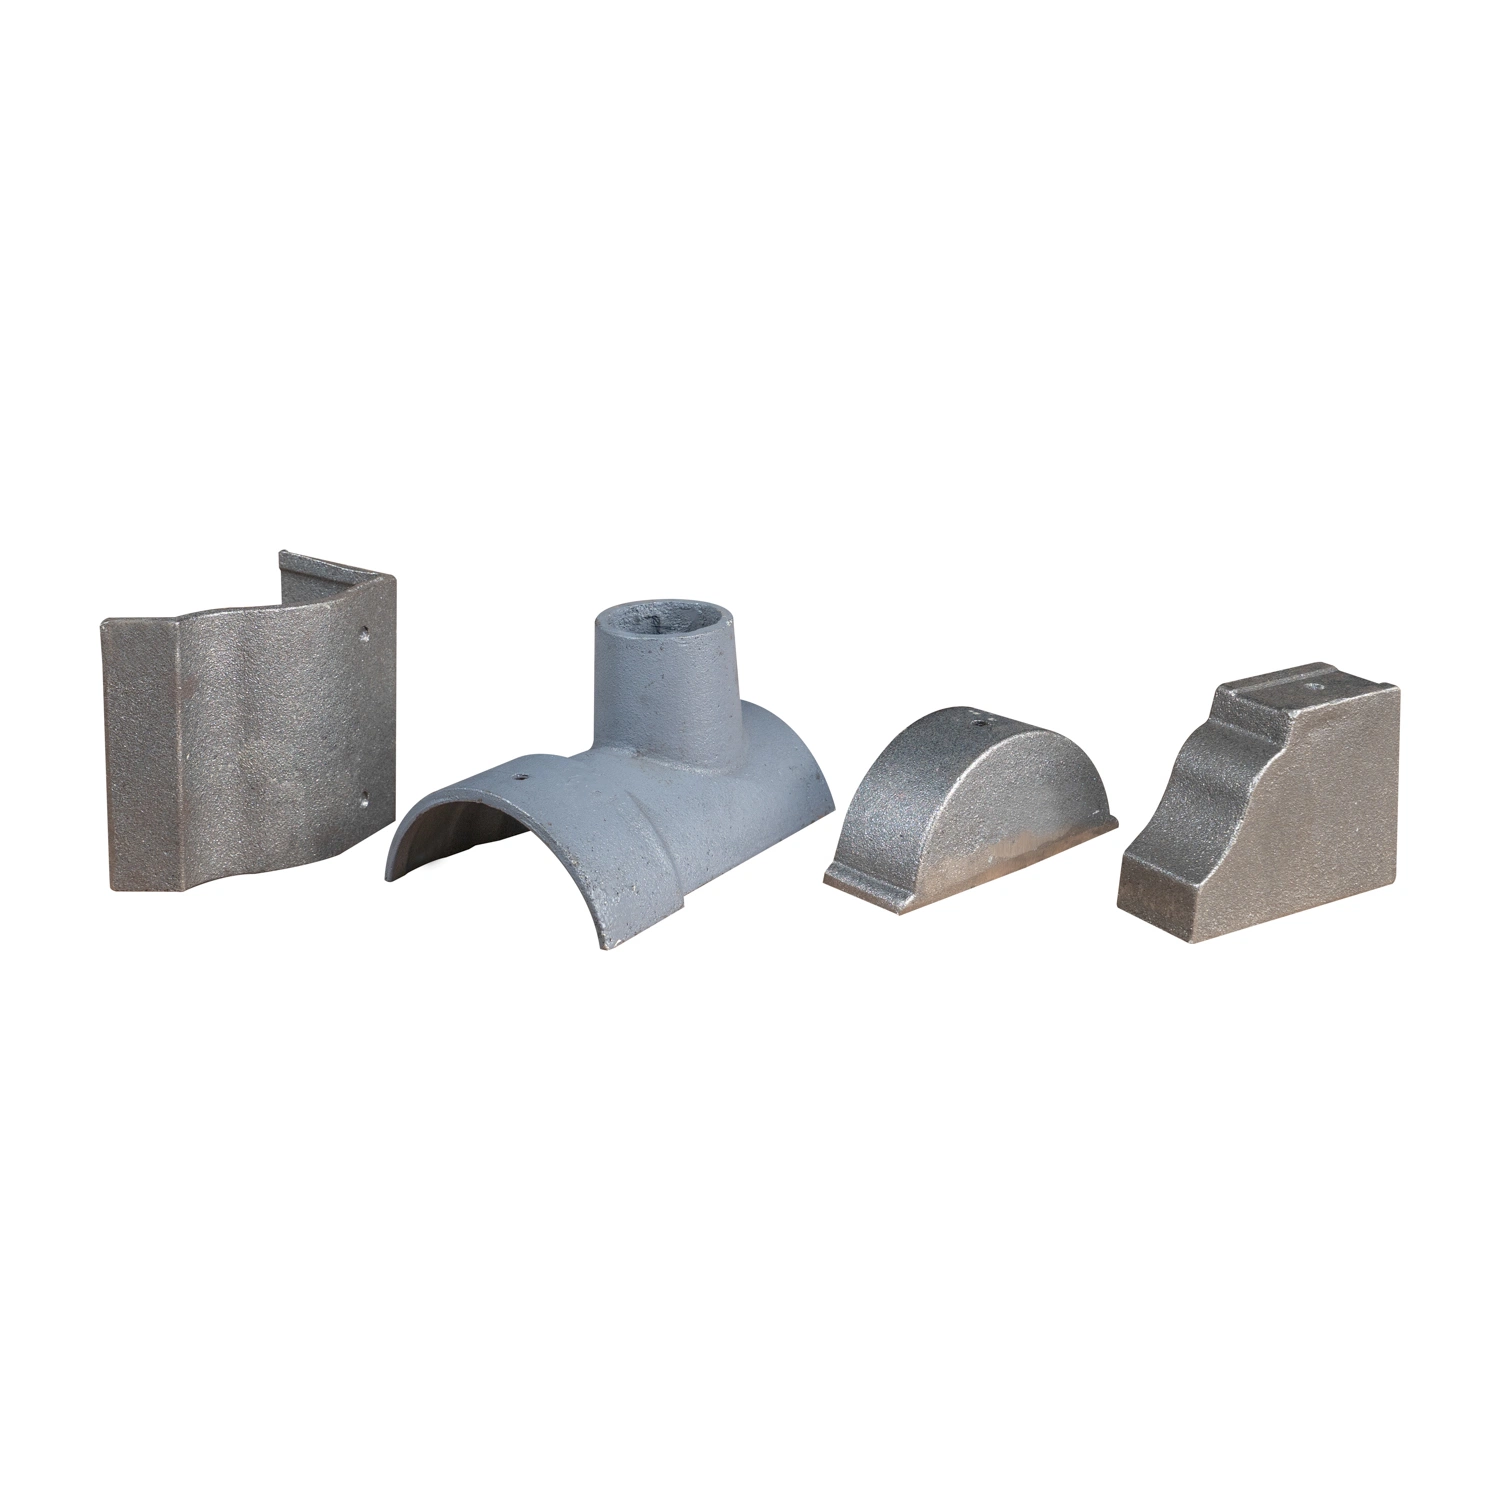 High Pressure Die Casting Precision Iron Sand Casting Parts with Grey Iron and Ductile Iron